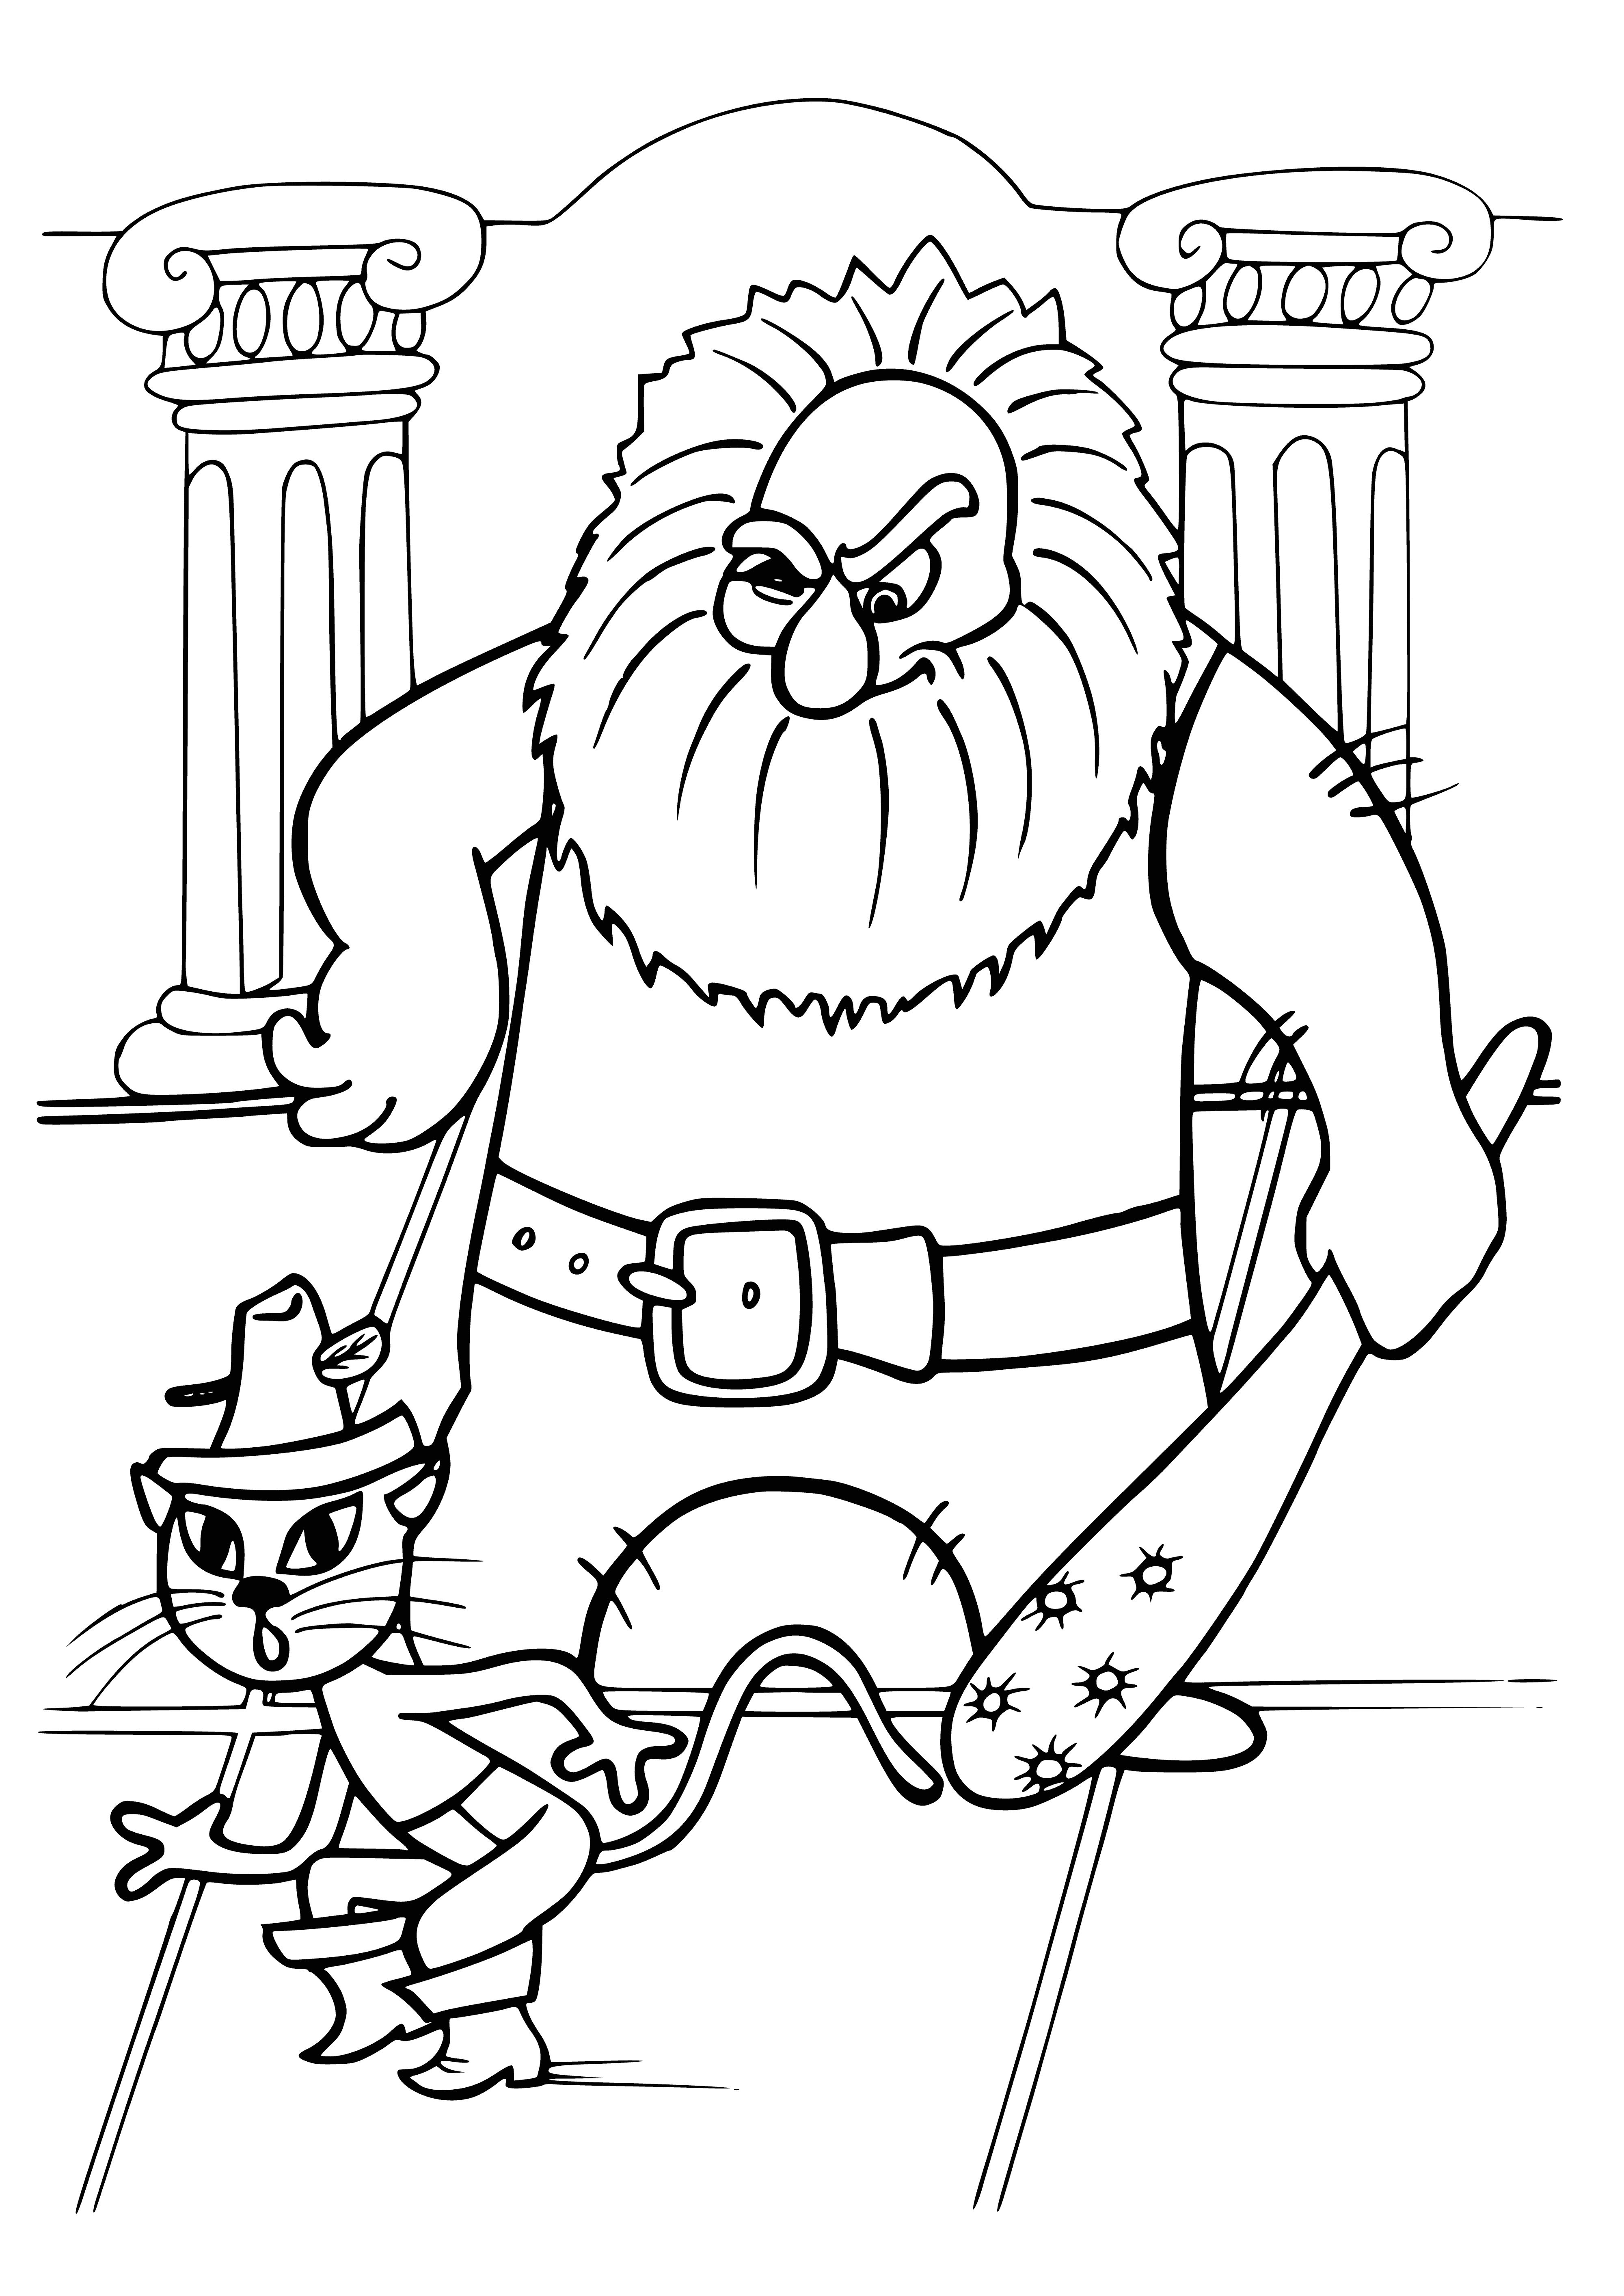 coloring page: Mischievous Puss in Boots, a smart black & white cat wearing a red & white striped shirt & black hat, sits atop a pile of bones.